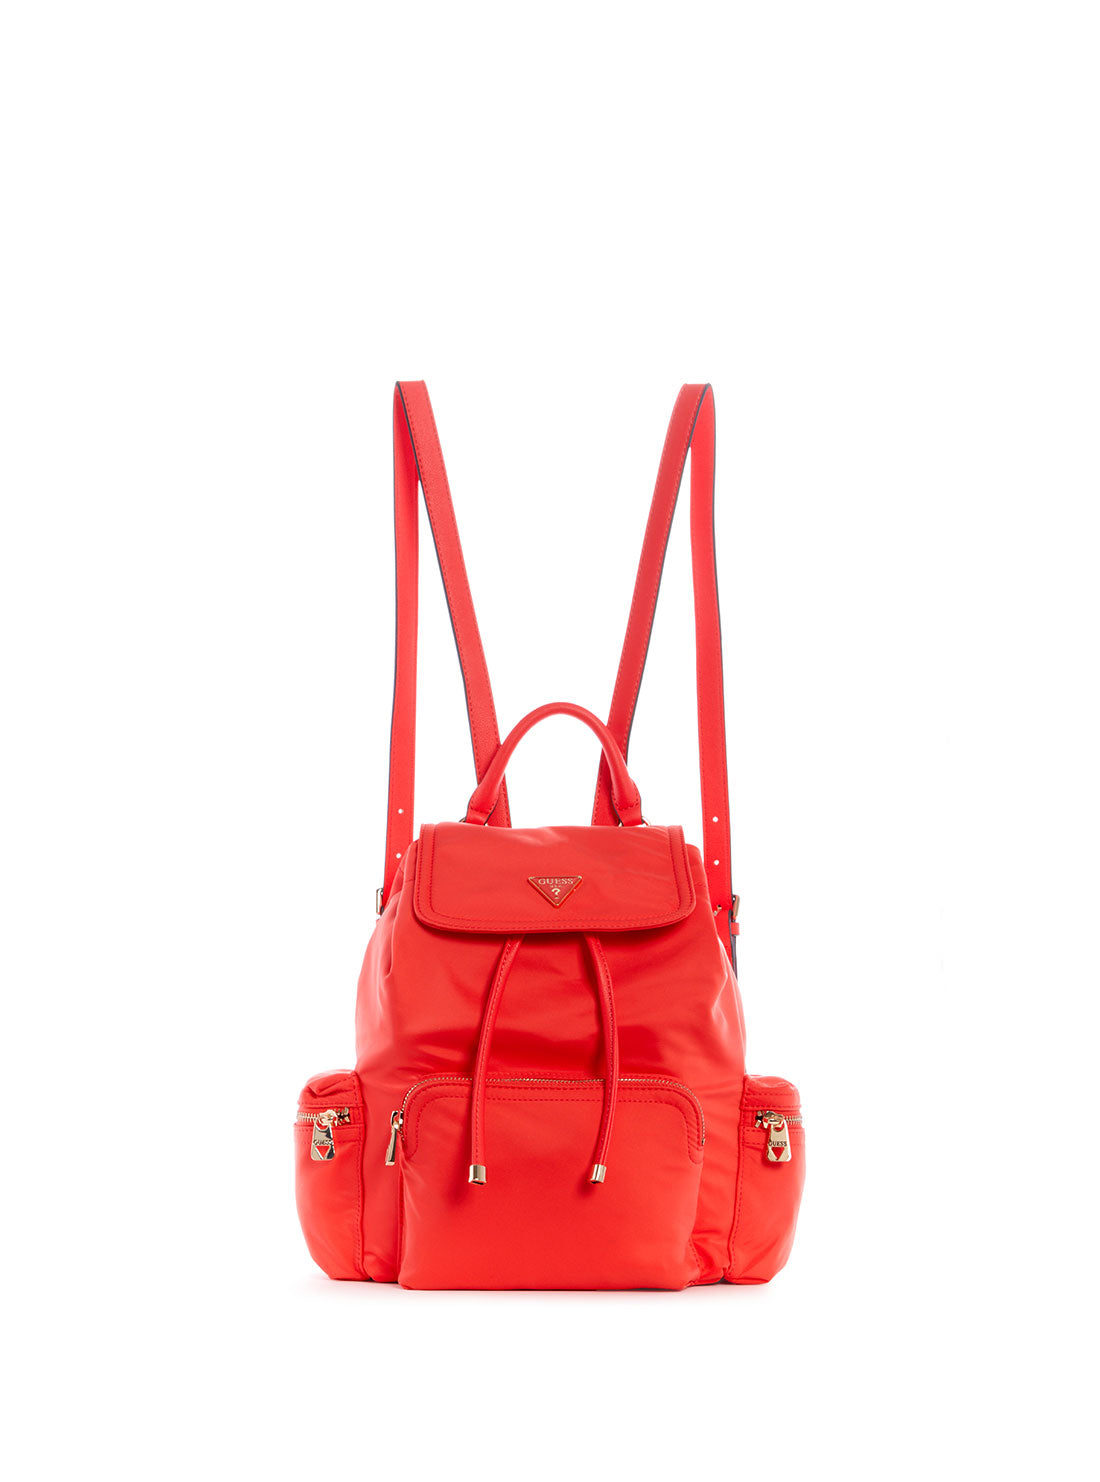 GUESS Women's Eco Red Gemma Backpack EYG839532 Front View